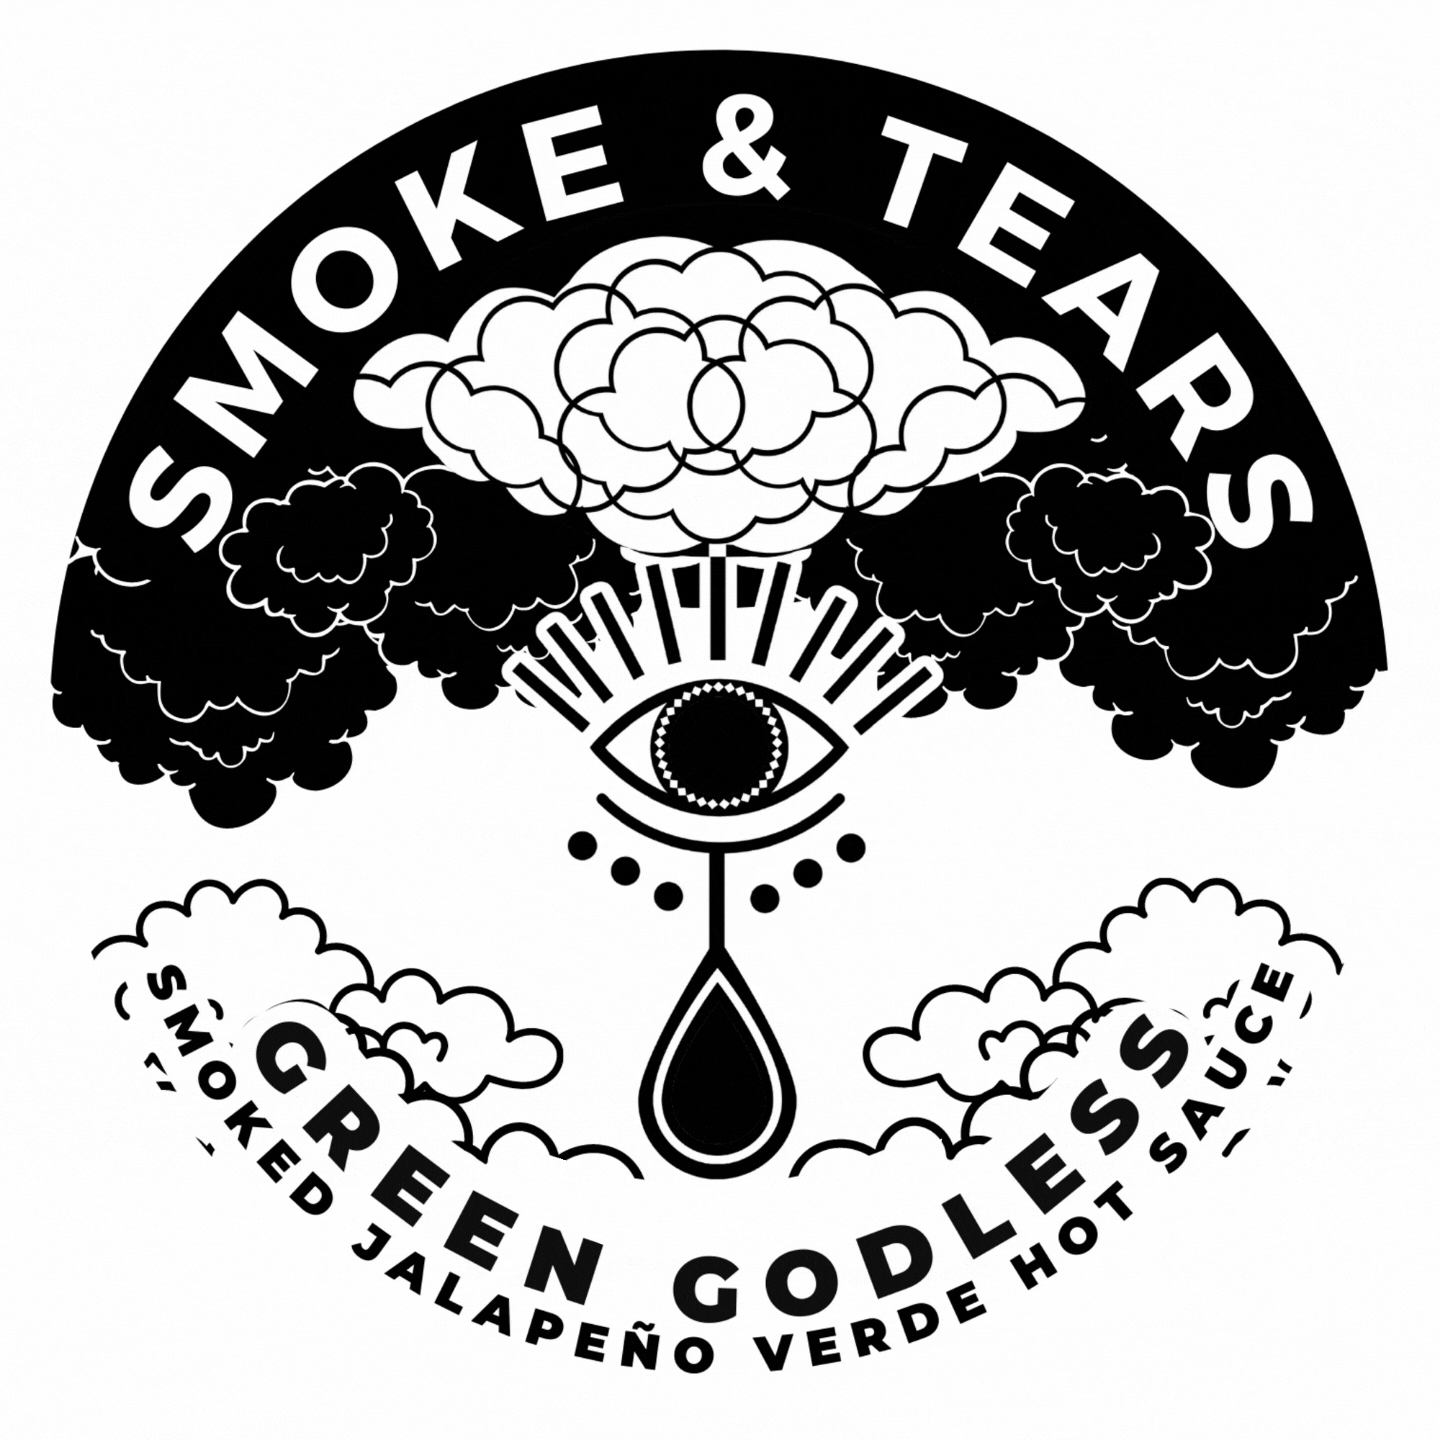 Bottle of Smoke & Tears Smoked Jalapeño Verde Gourmet Artisan Hot Sauce Chef-crafted and created in Toronto with love